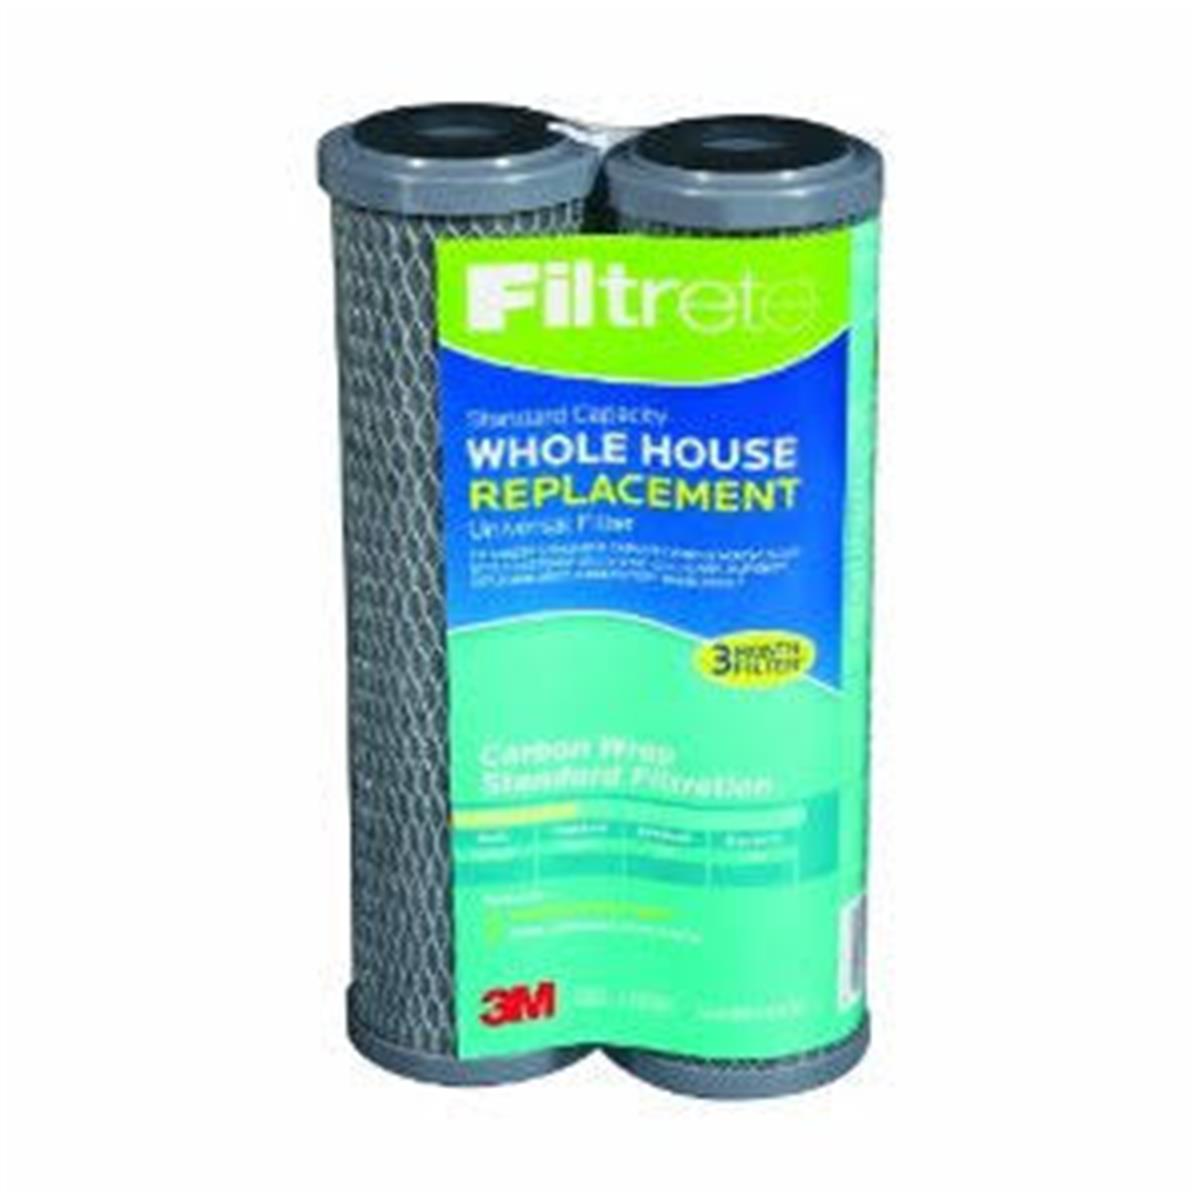 Picture of Filtrete FILTRETE-3WH-STDCW-F02 10 x 2.5 in. Replacement Water Filter Cartridges - Pack of 2